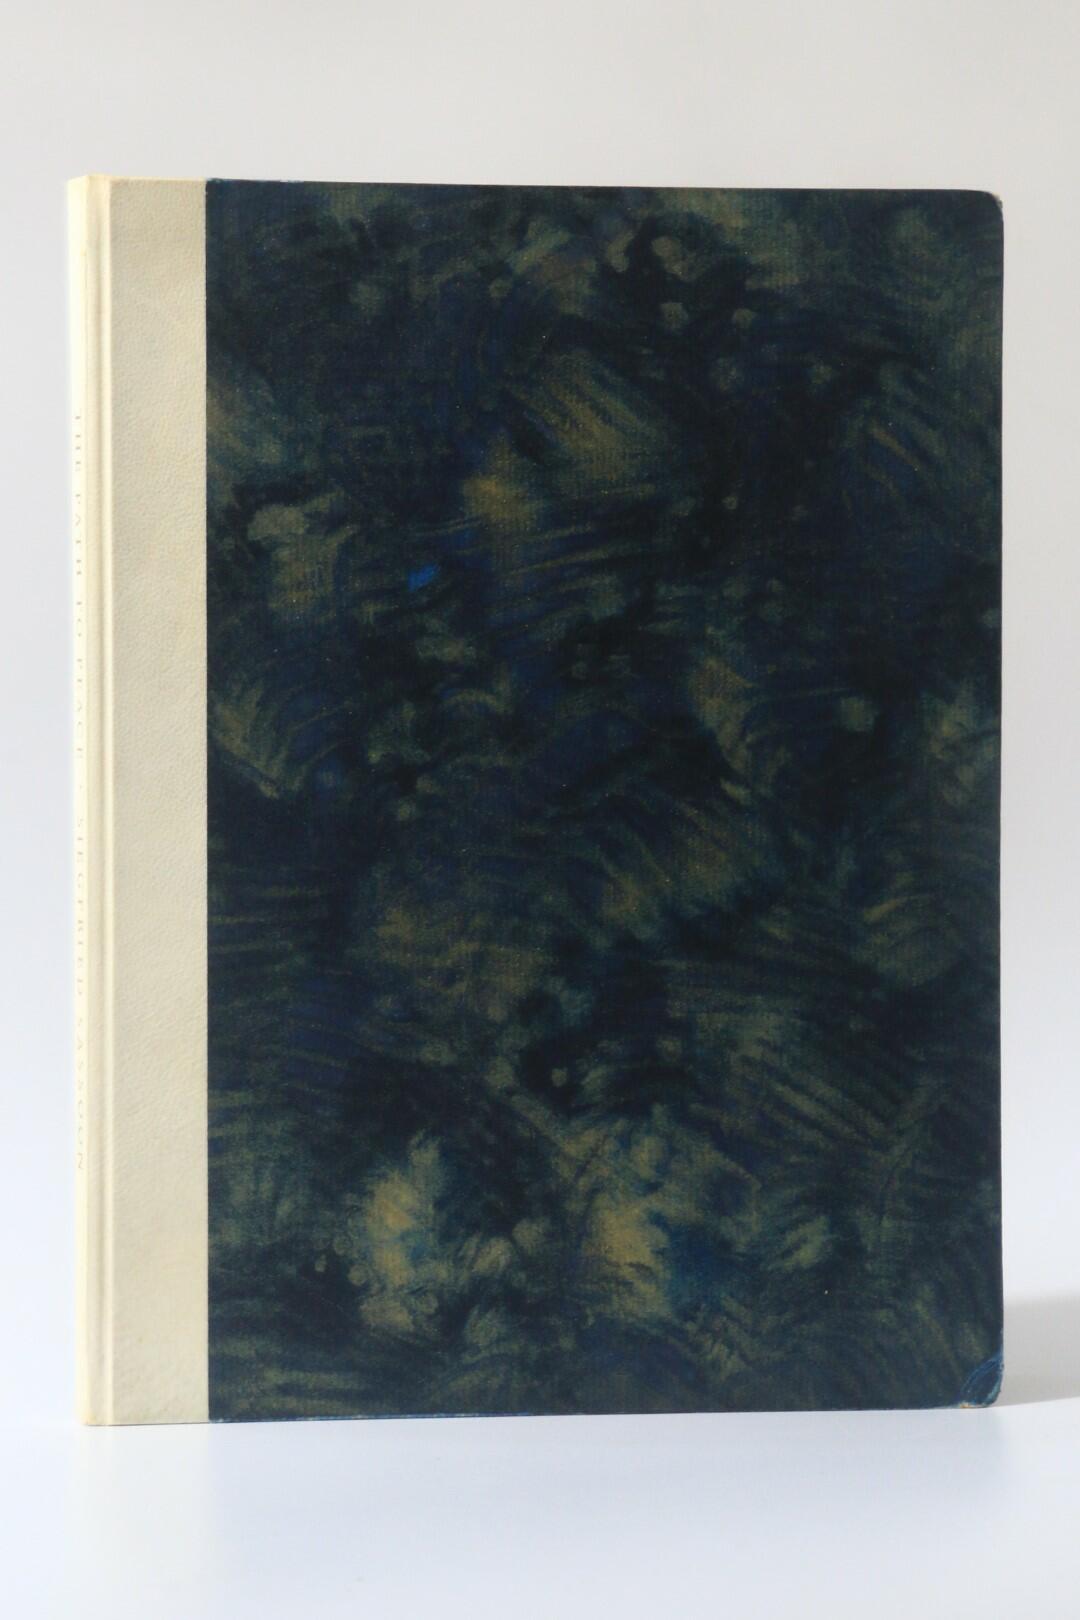 Siegfried Sassoon - The Path to Peace - Stanbrook Abbey Press, 1960, Signed Limited Edition.